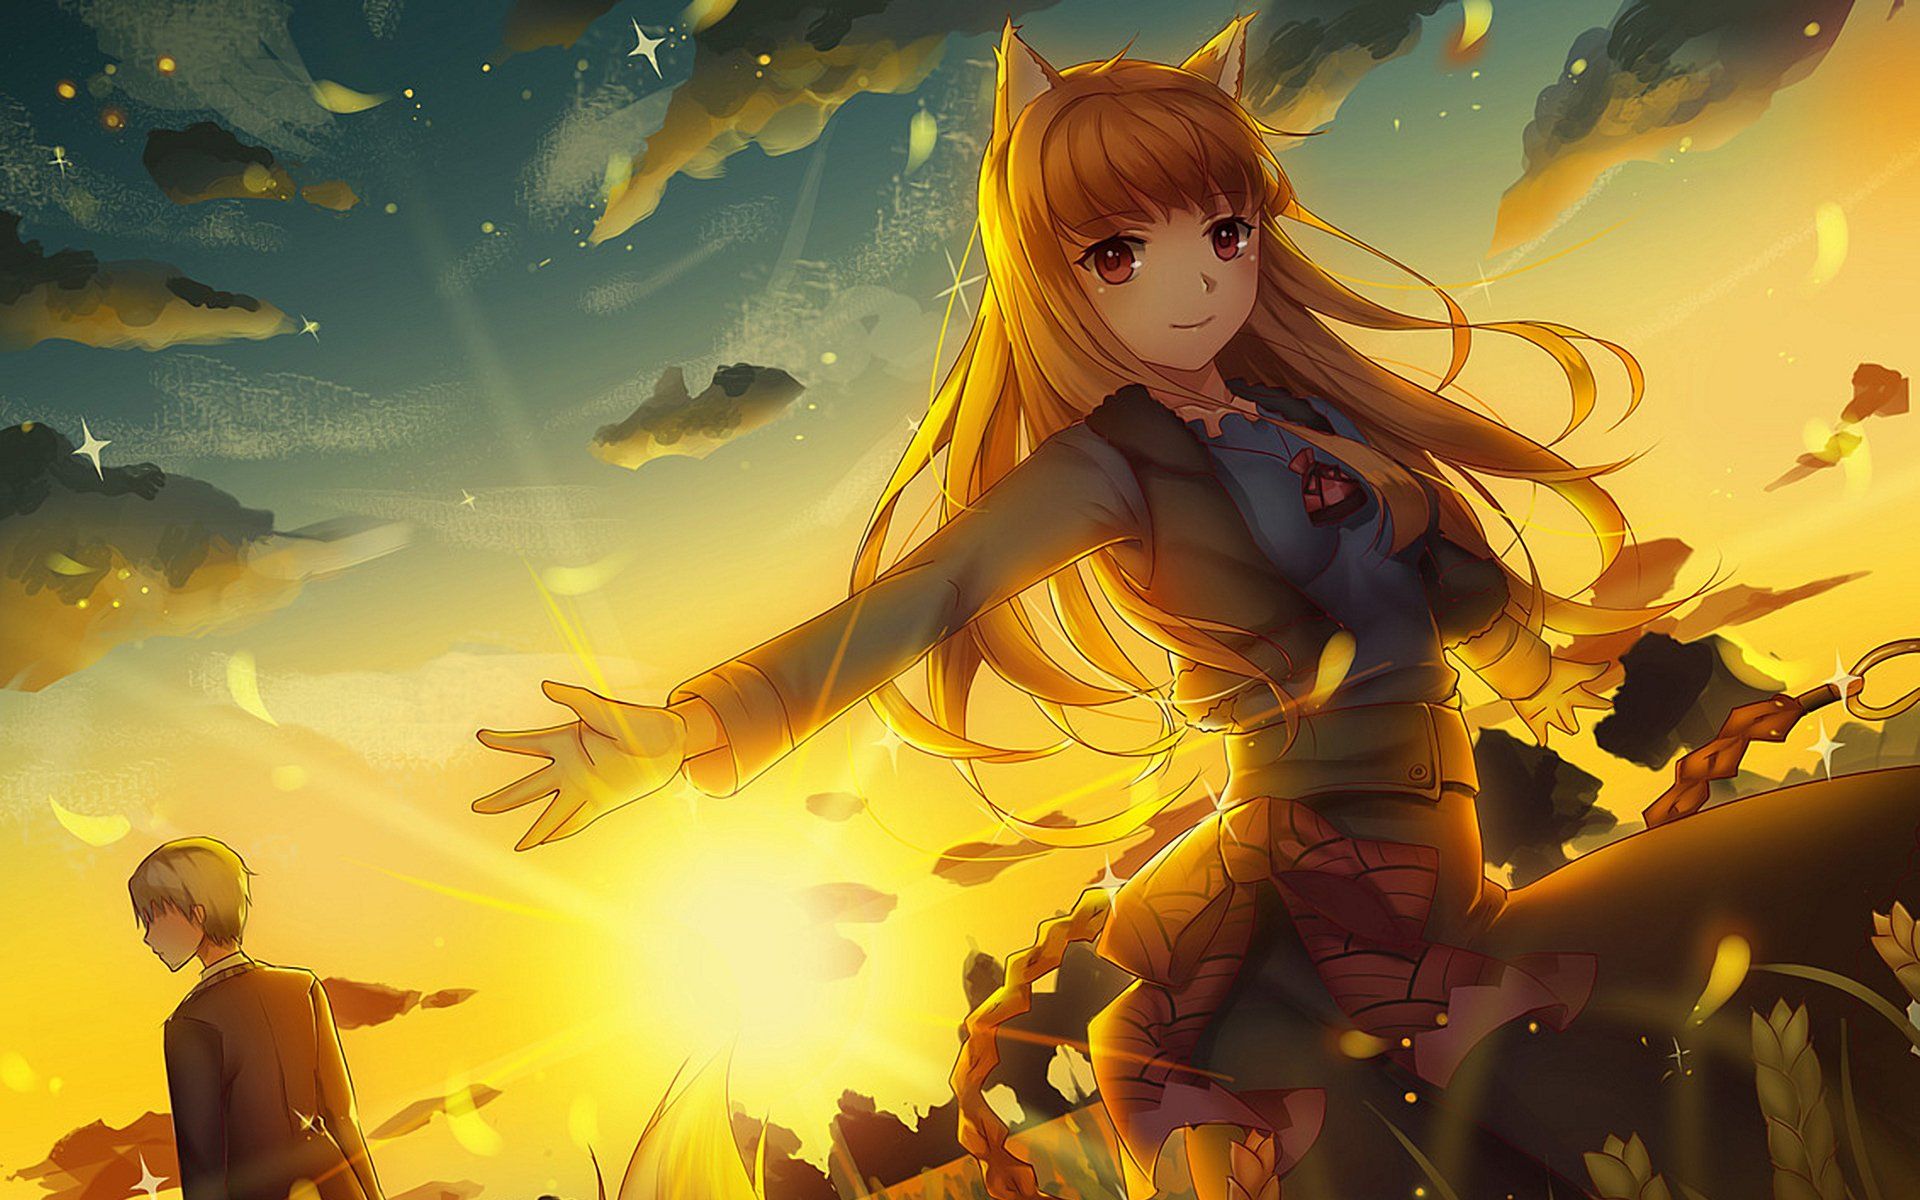 Holo Spice And Wolf Wallpapers